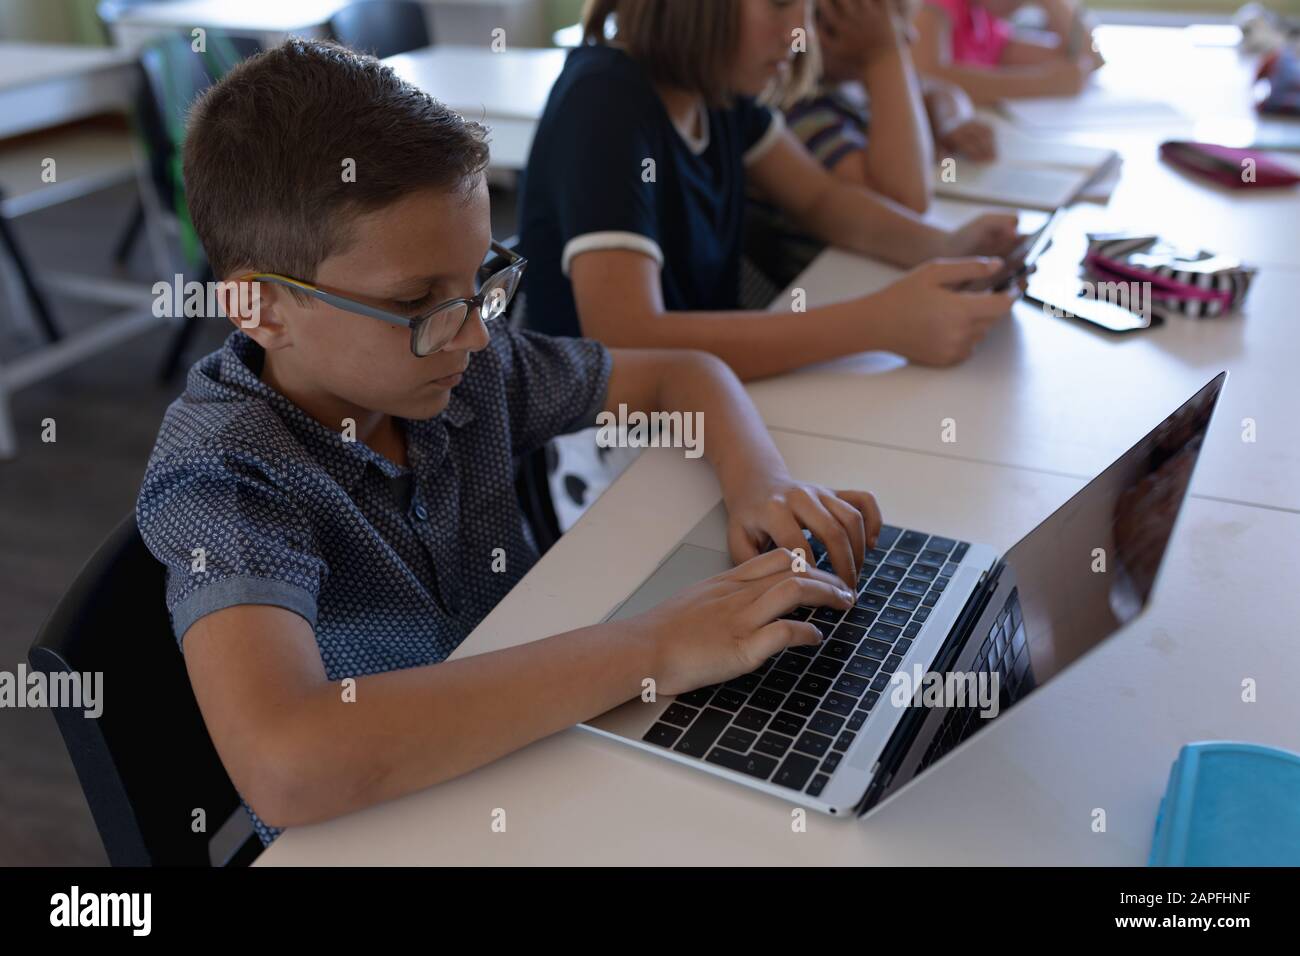 Schoolboy wearing glasses sitting at a desk using a laptop computer Stock Photo